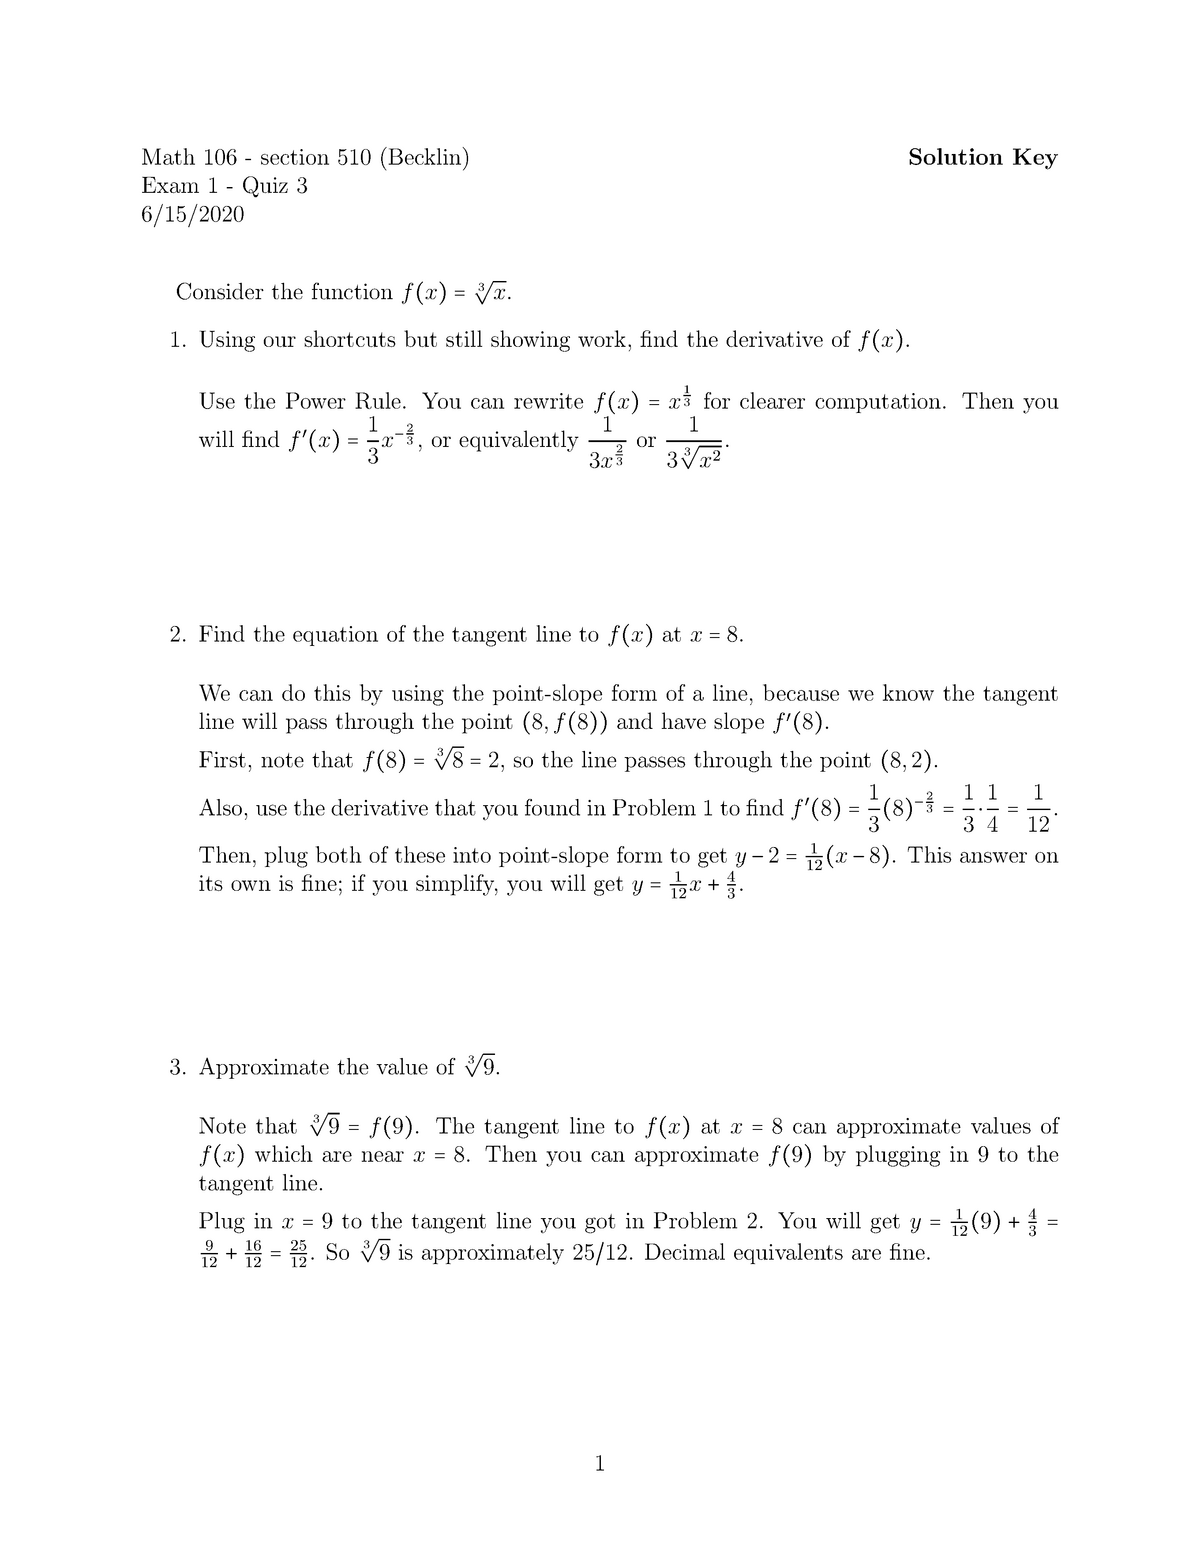 calculus-1-exam-and-workbook-solutions-math-106-section-510